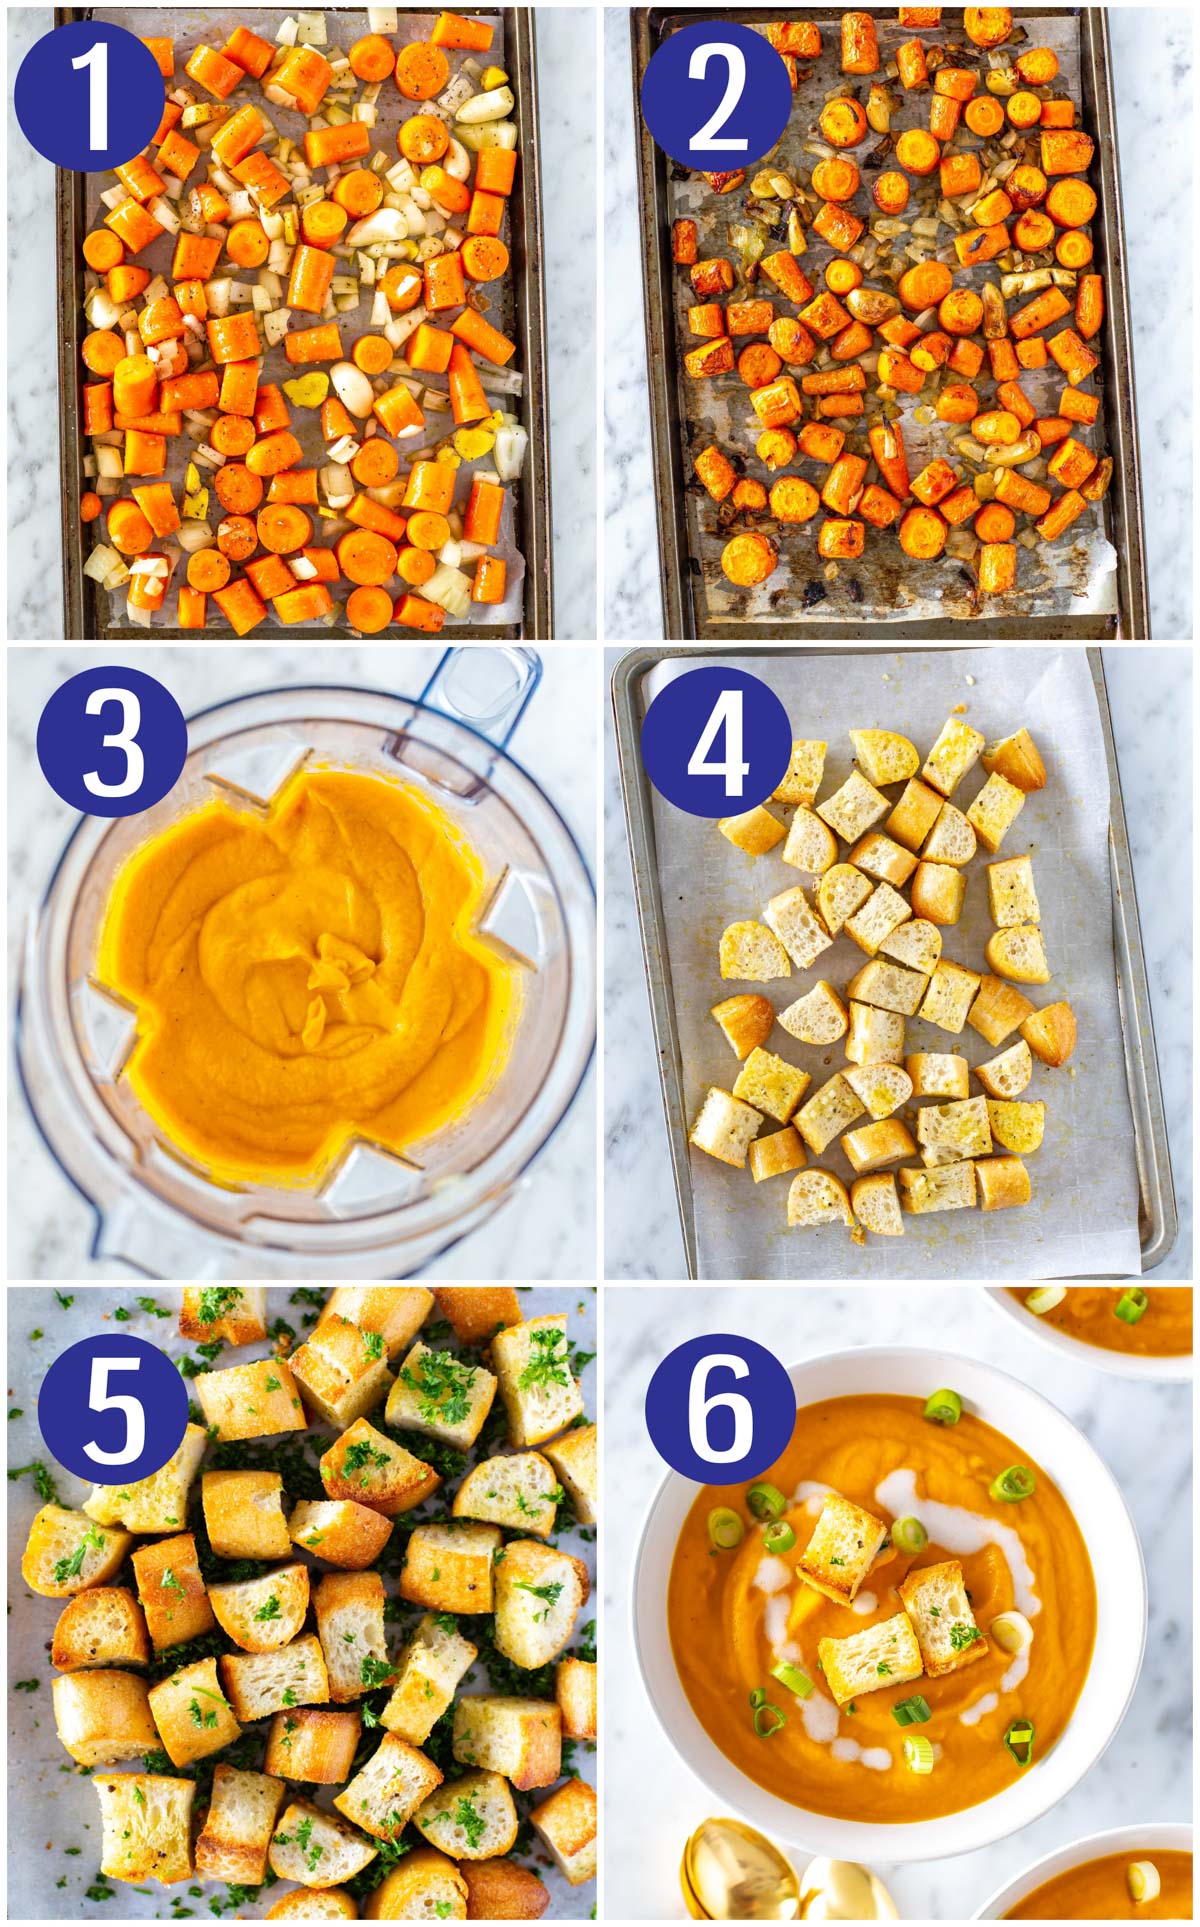 Step by step collage for making Carrot Ginger Soup: prep vegetables, roast vegetables, puree soup, cut up croutons, bake croutons, and make carrot ginger soup.